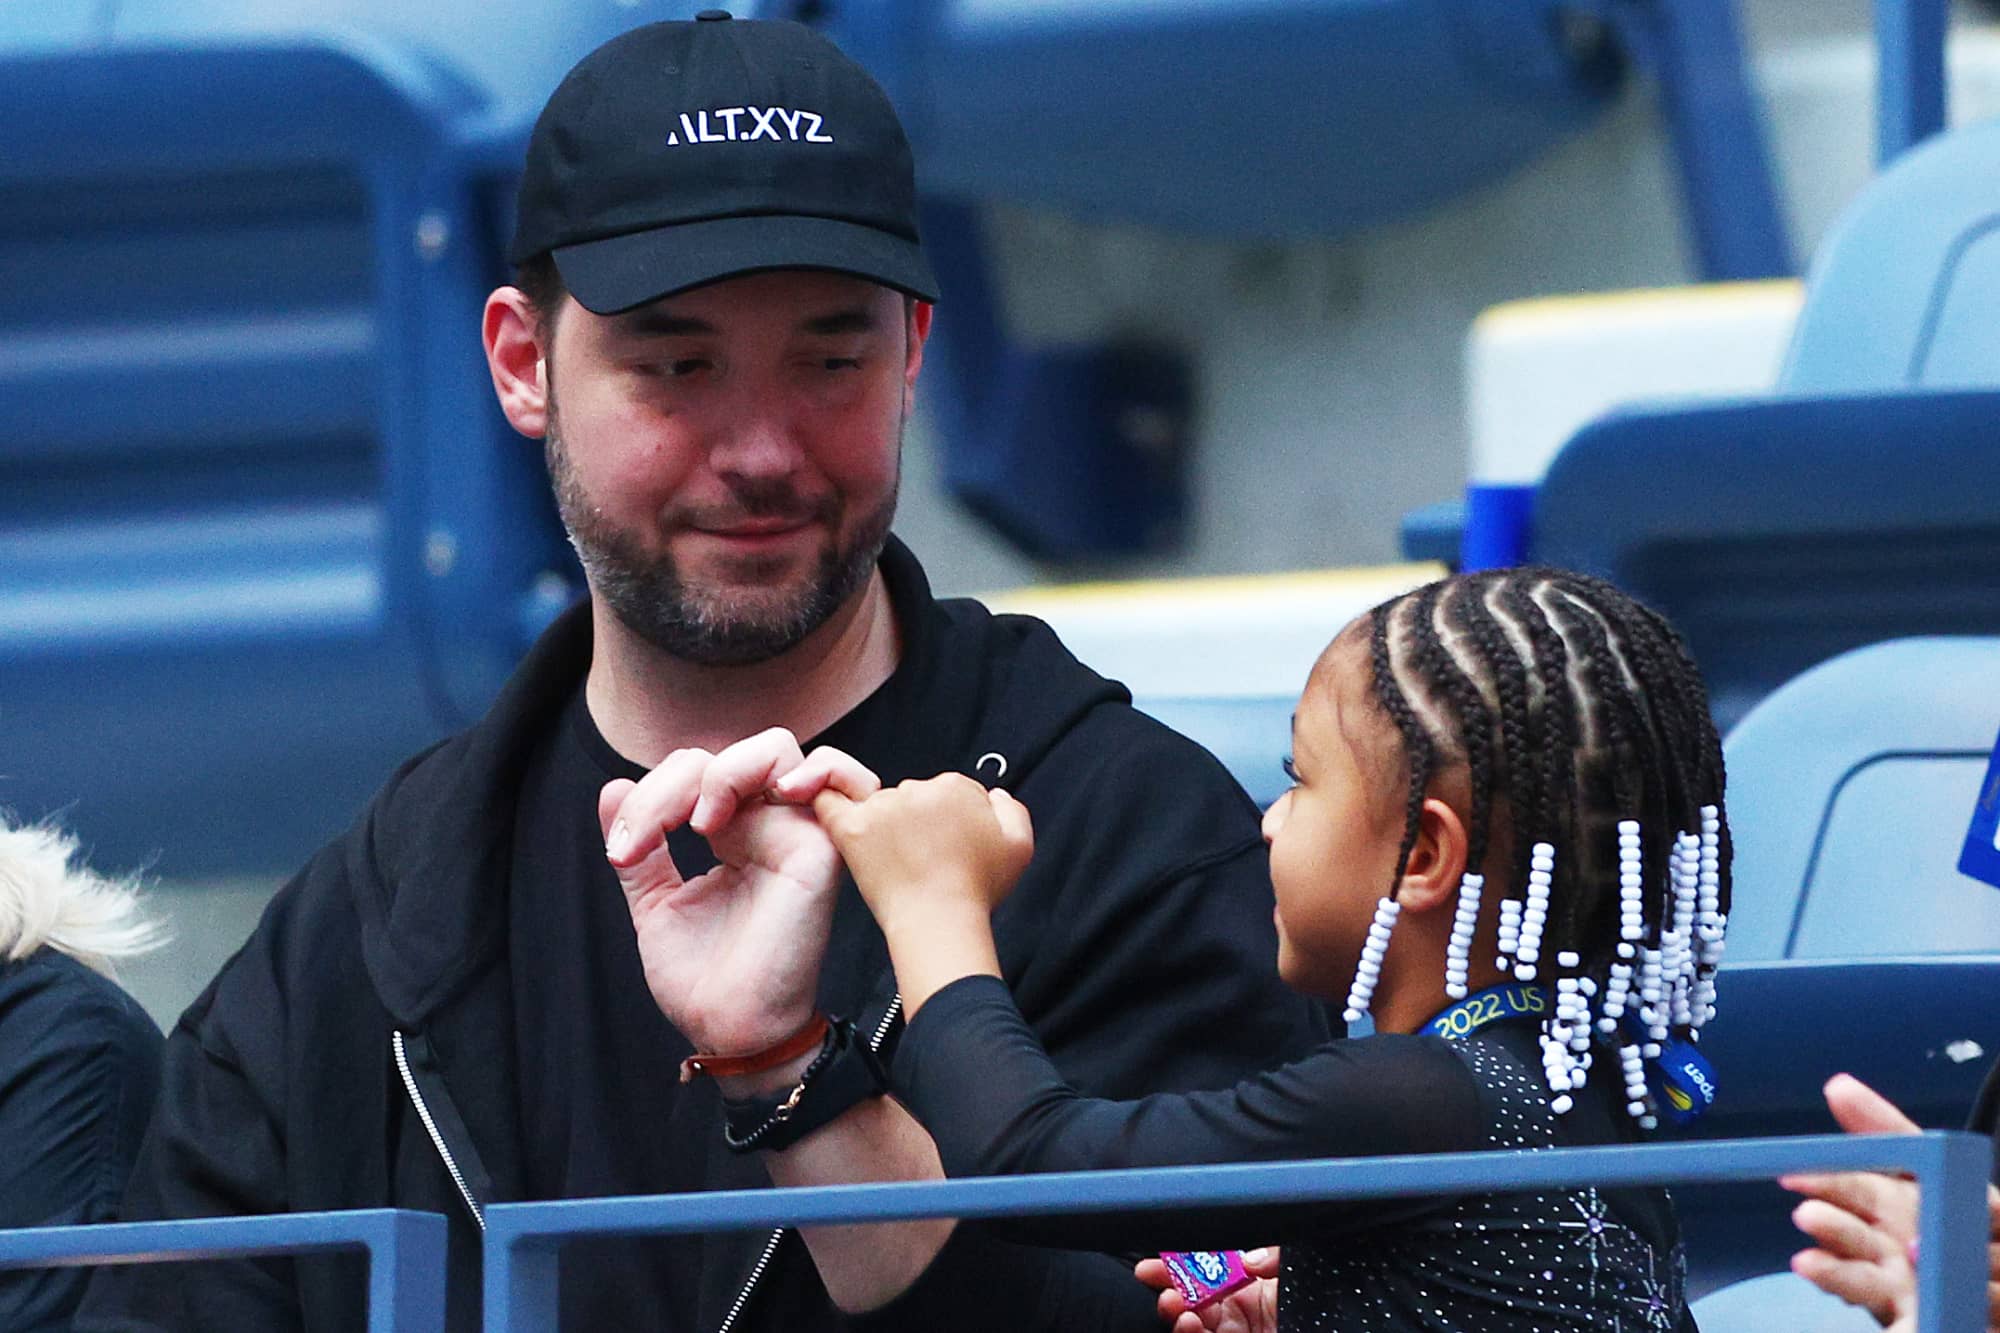 Olympia Ohanian's Braids at the 2022 US Open